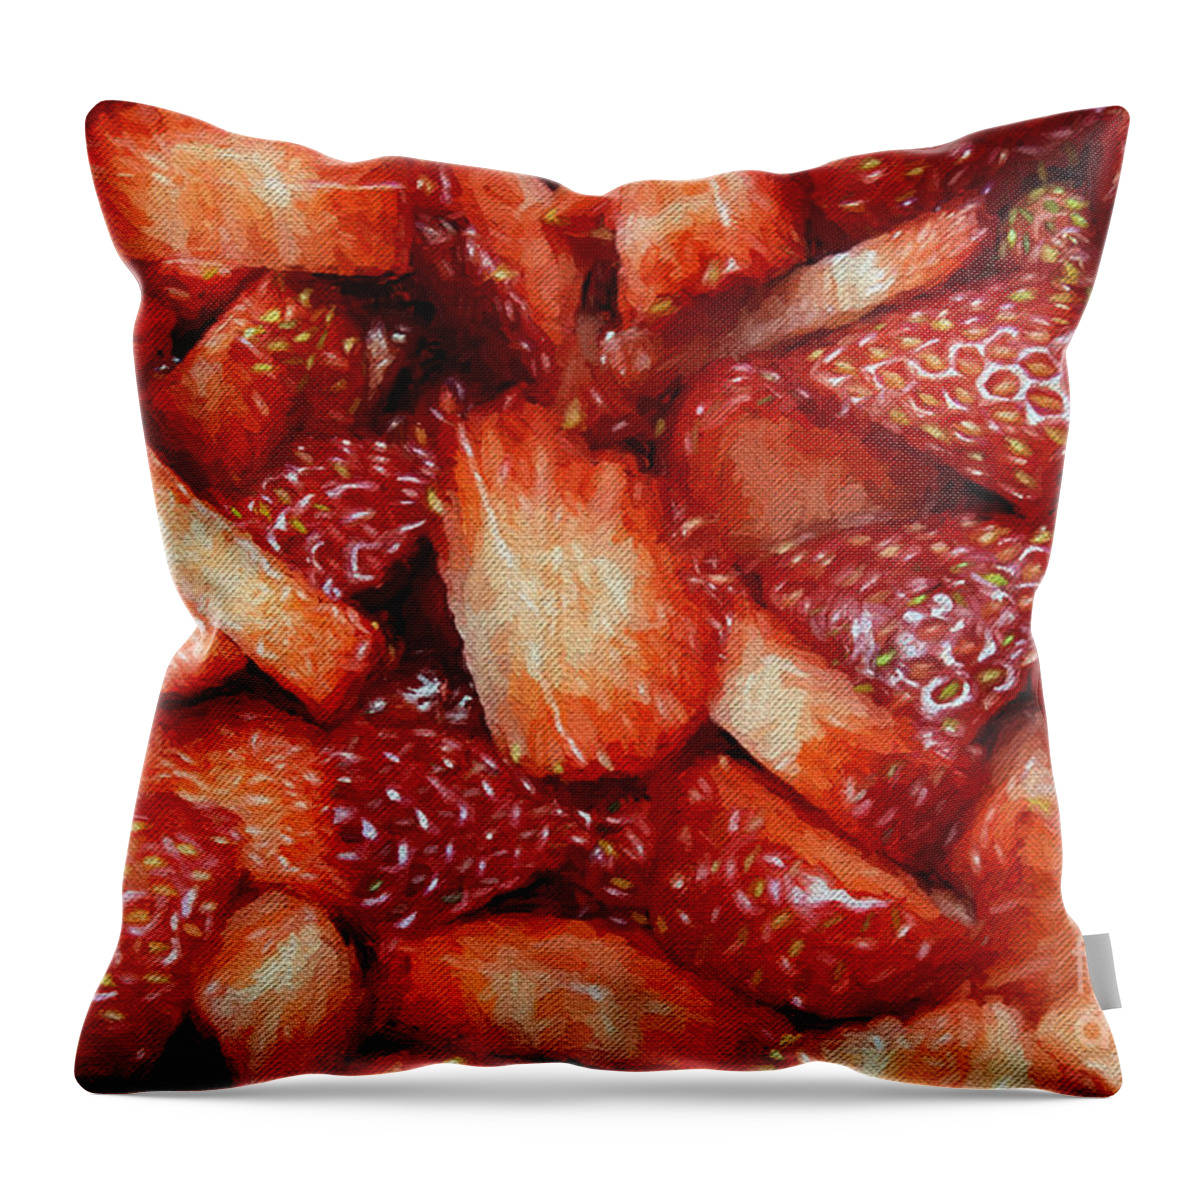 Andee Design Strawberries Throw Pillow featuring the photograph Strawberry Slices by Andee Design